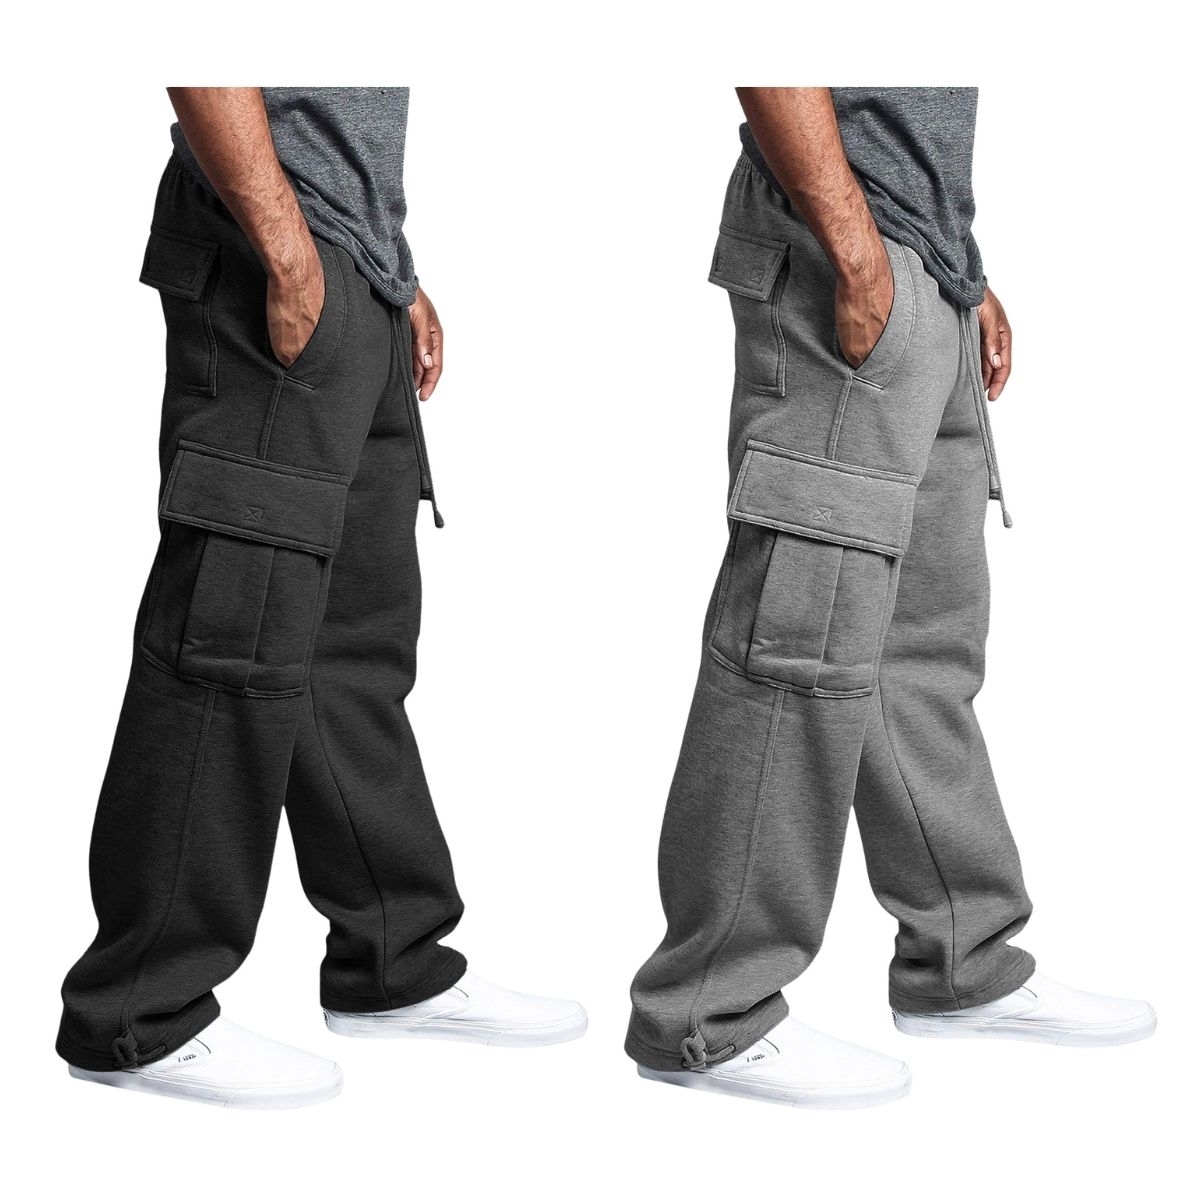 2-Pack: Men's Casual Solid Fleece Lined Cargo Jogger Soft Sweatpants With Pockets - Black&black, X-large